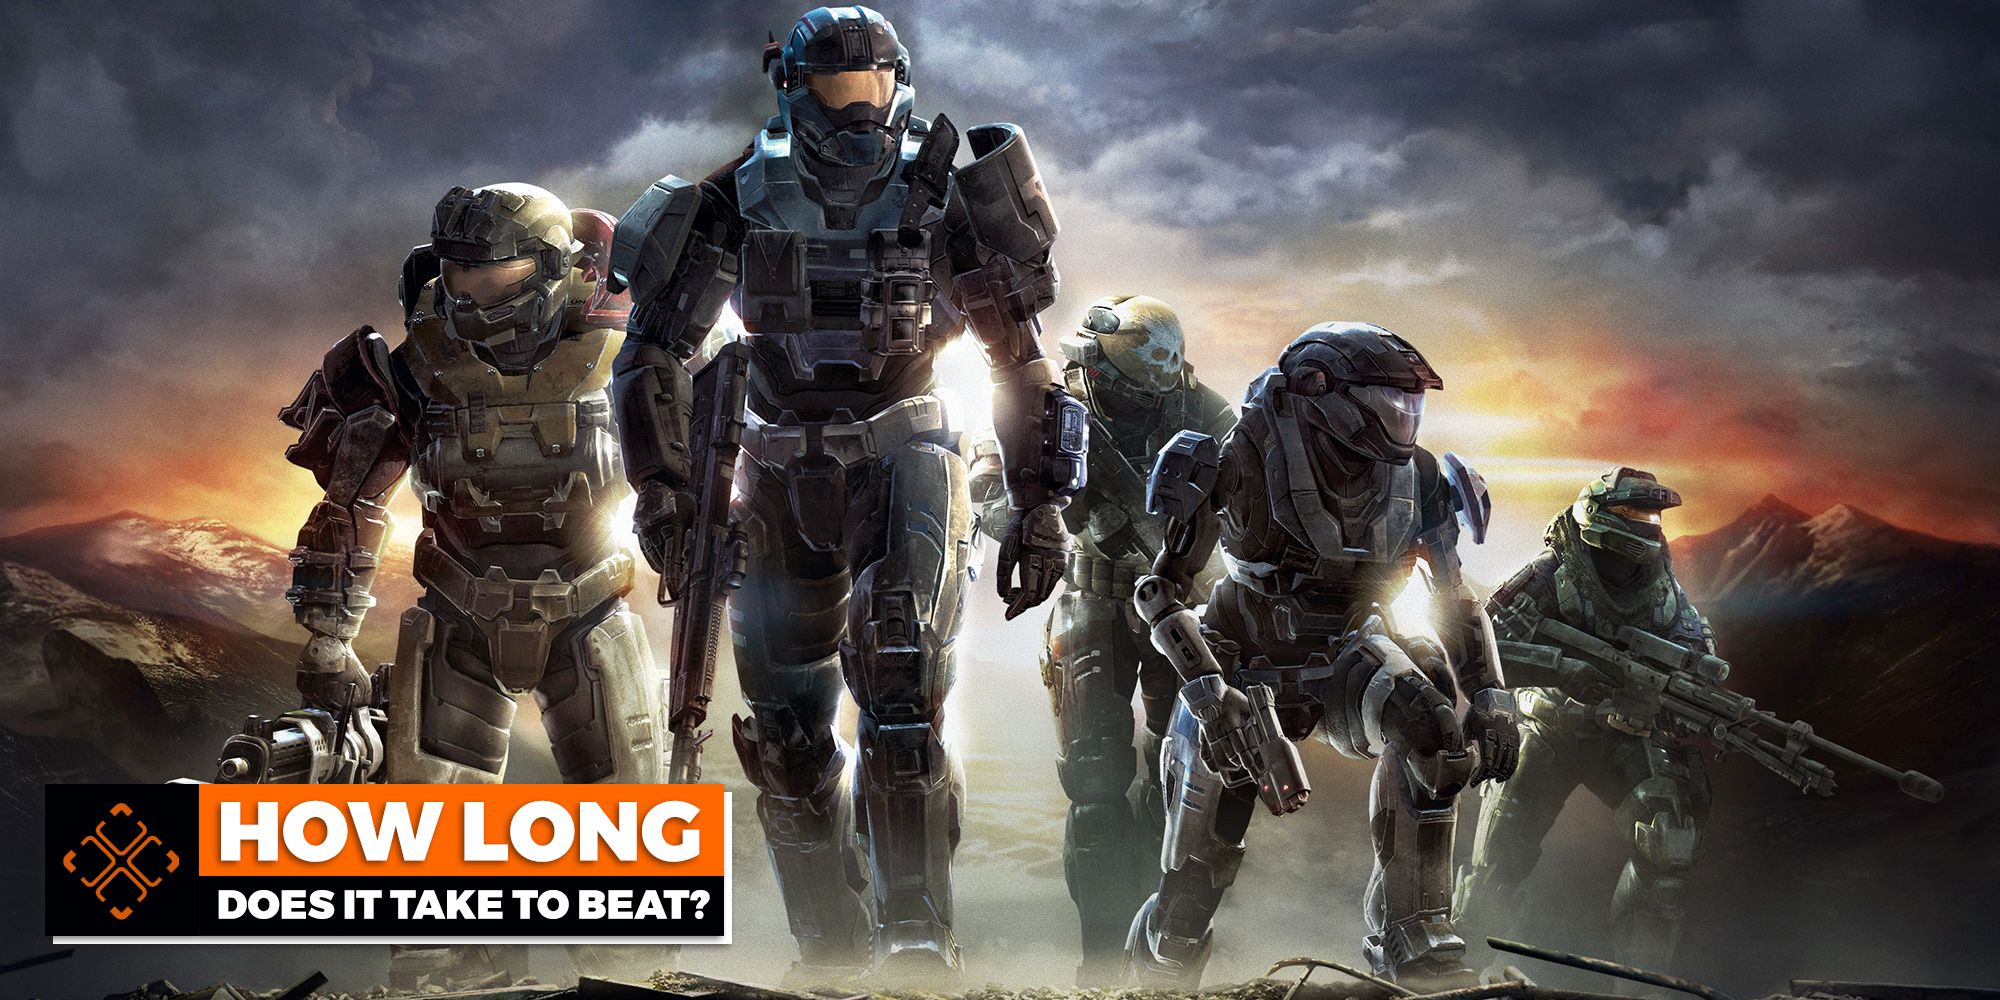 Game art from Halo Reach.